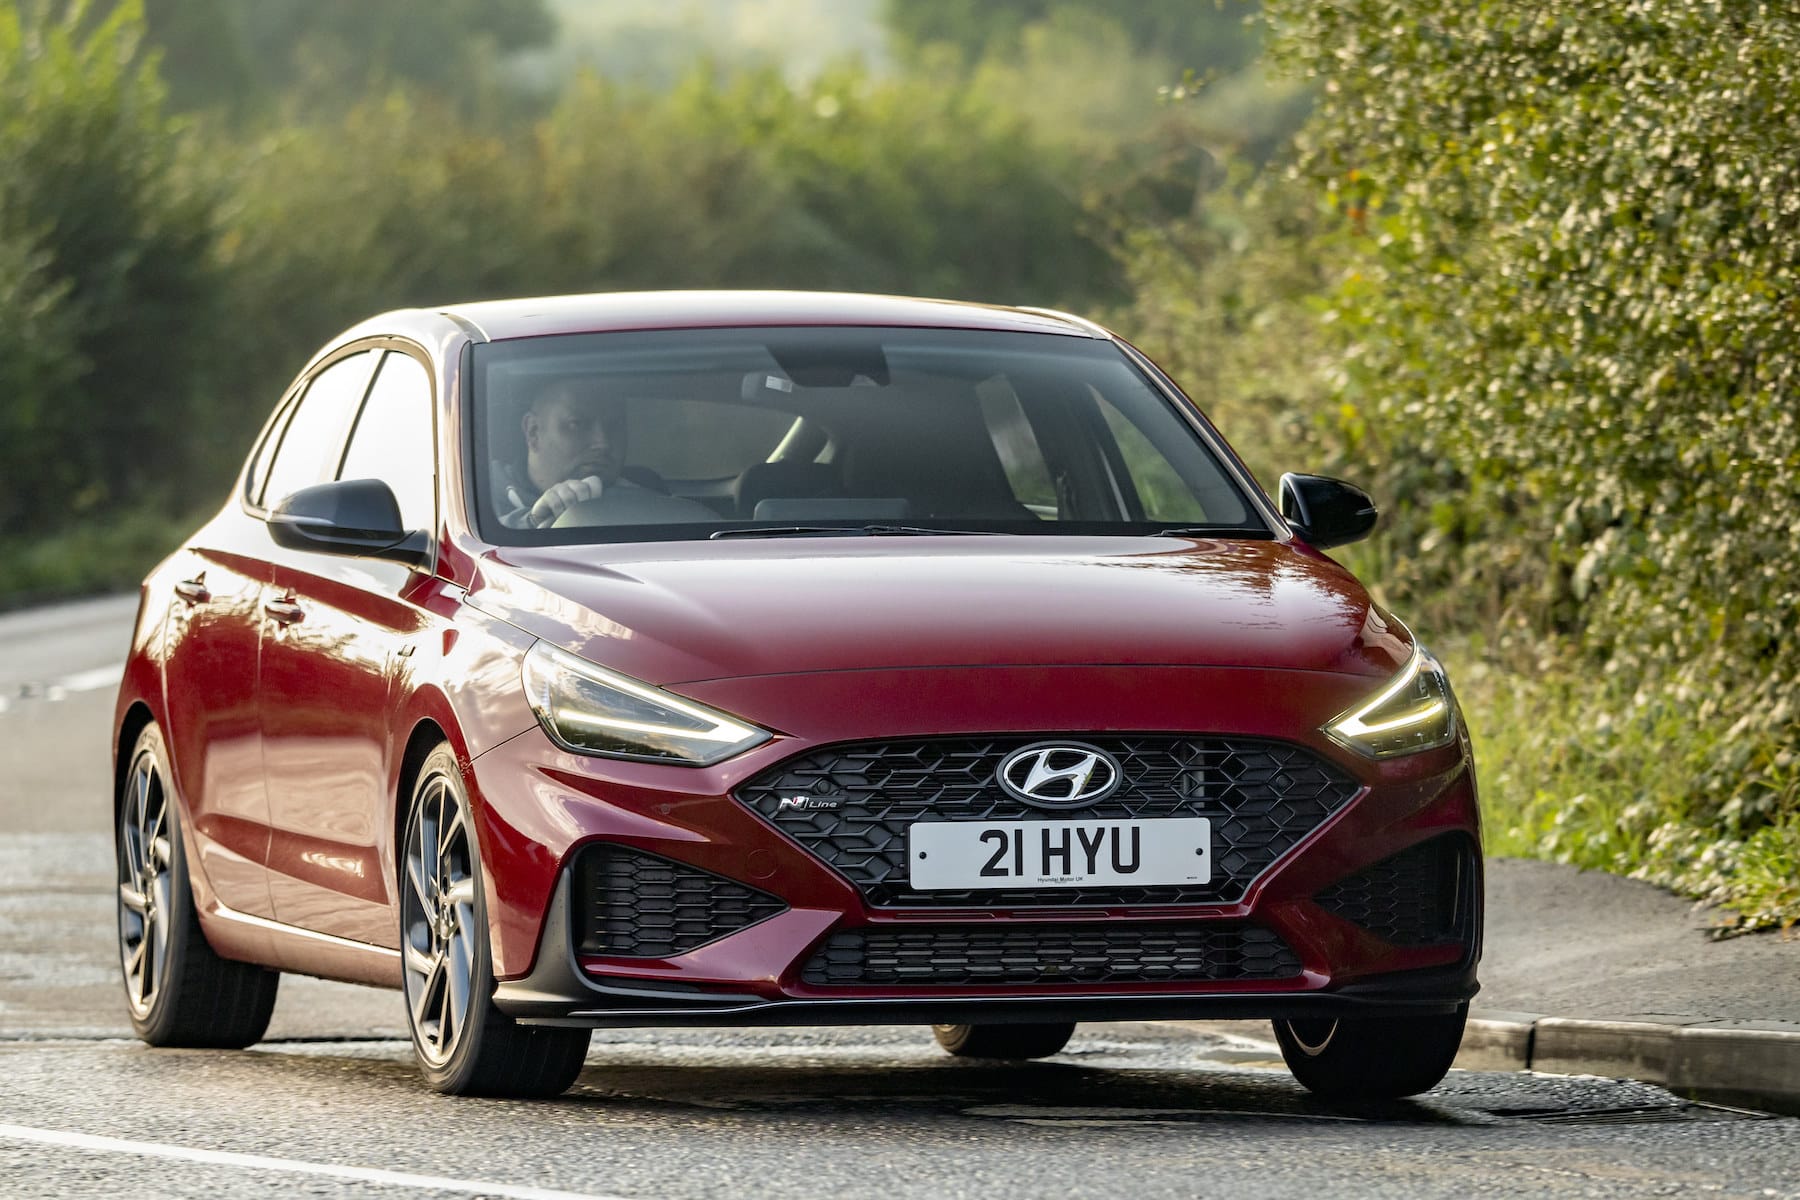 Hyundai i30 Fastback (2020 facelift) – front view